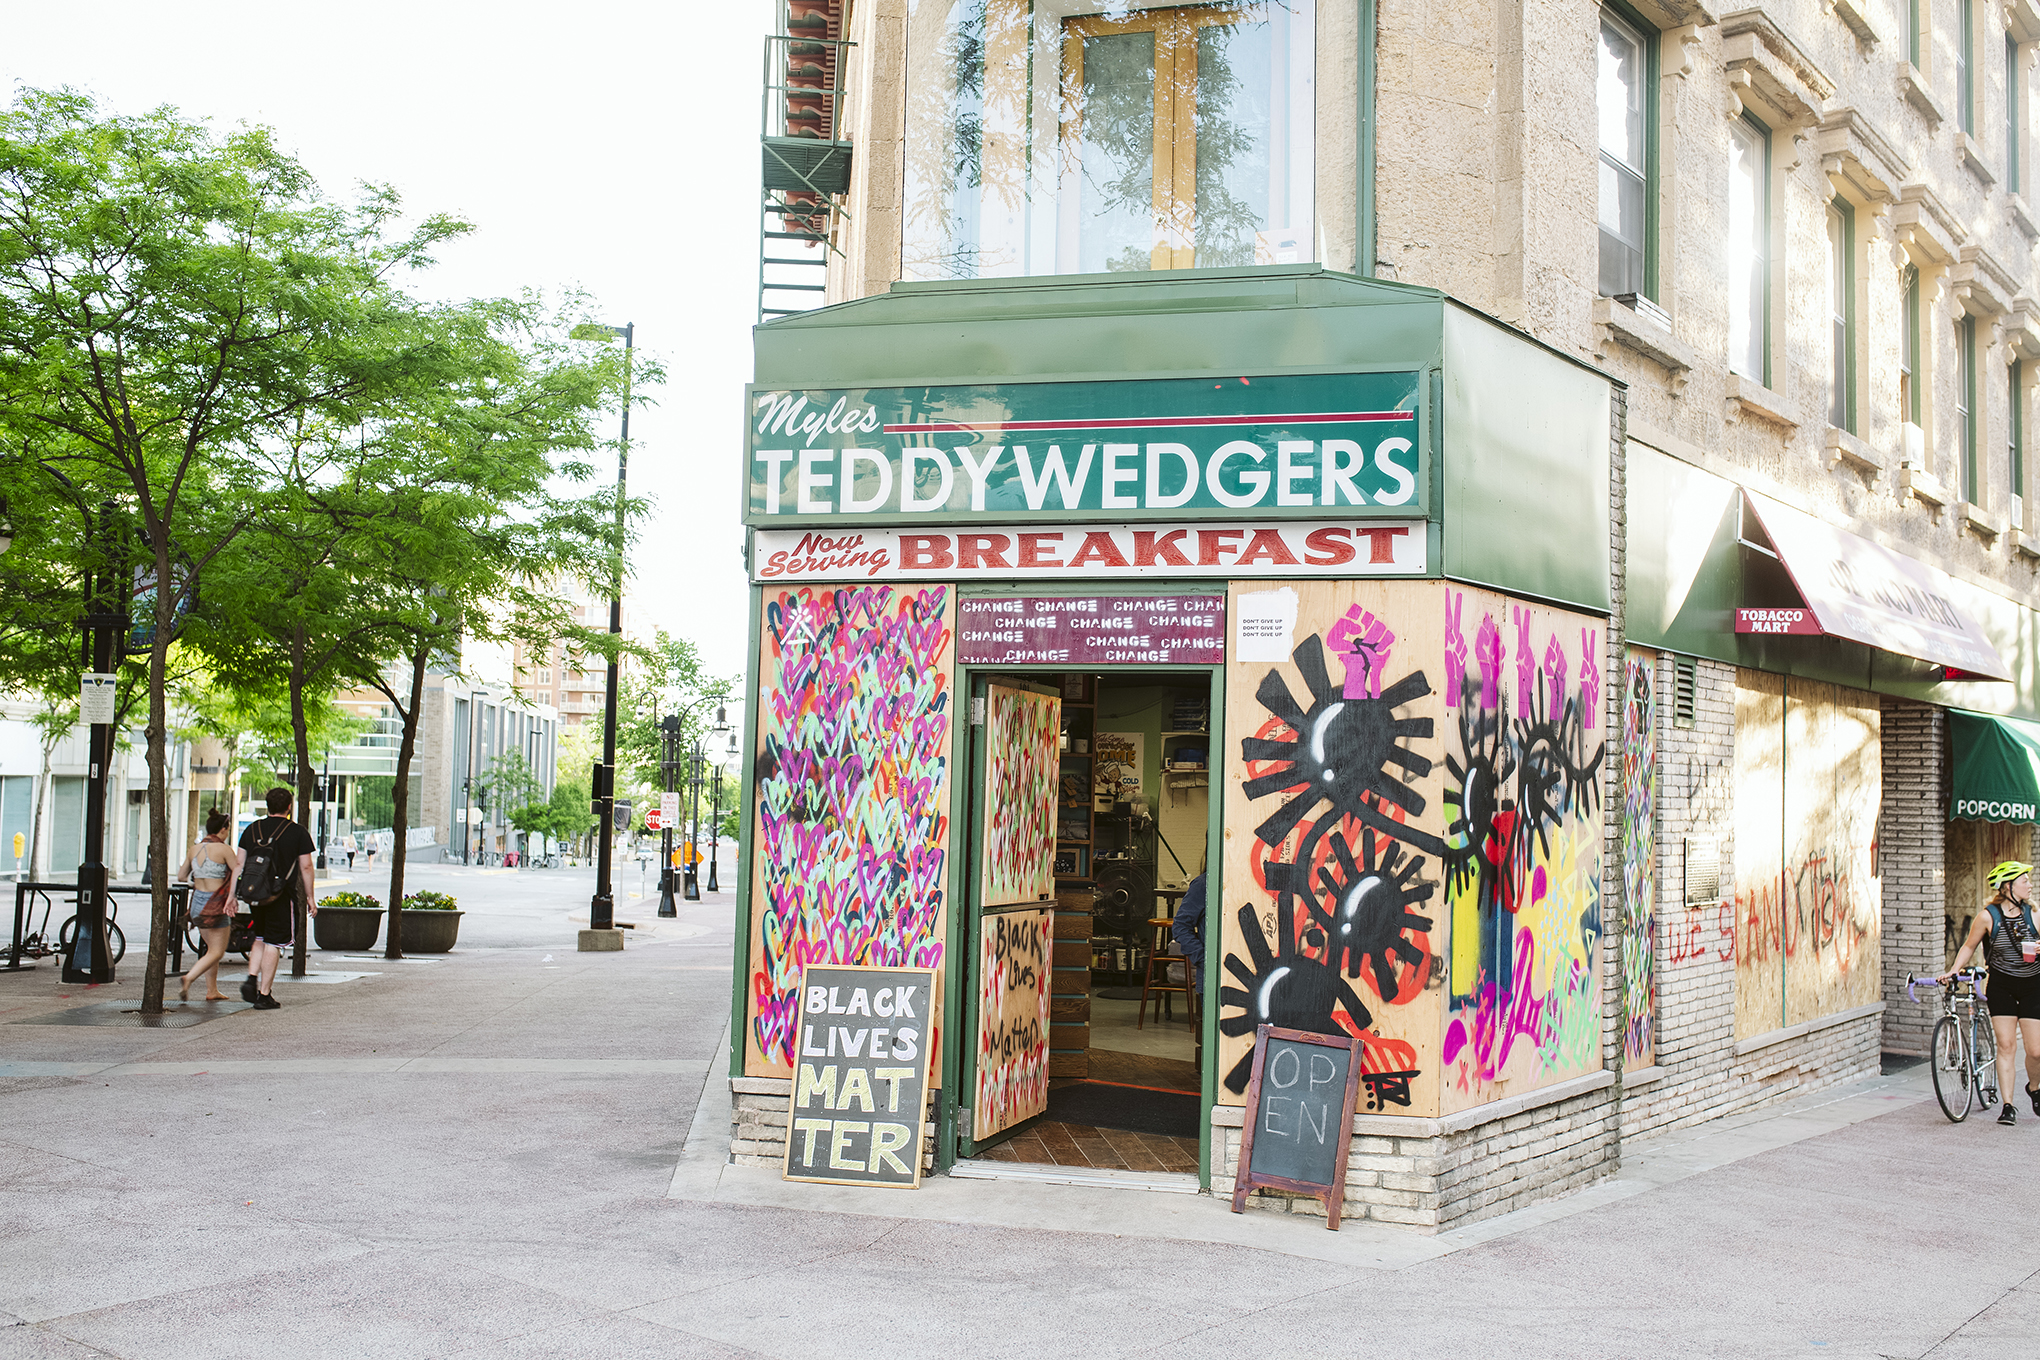 Triangulador's artwork is displayed on boarded up store windows on State Street